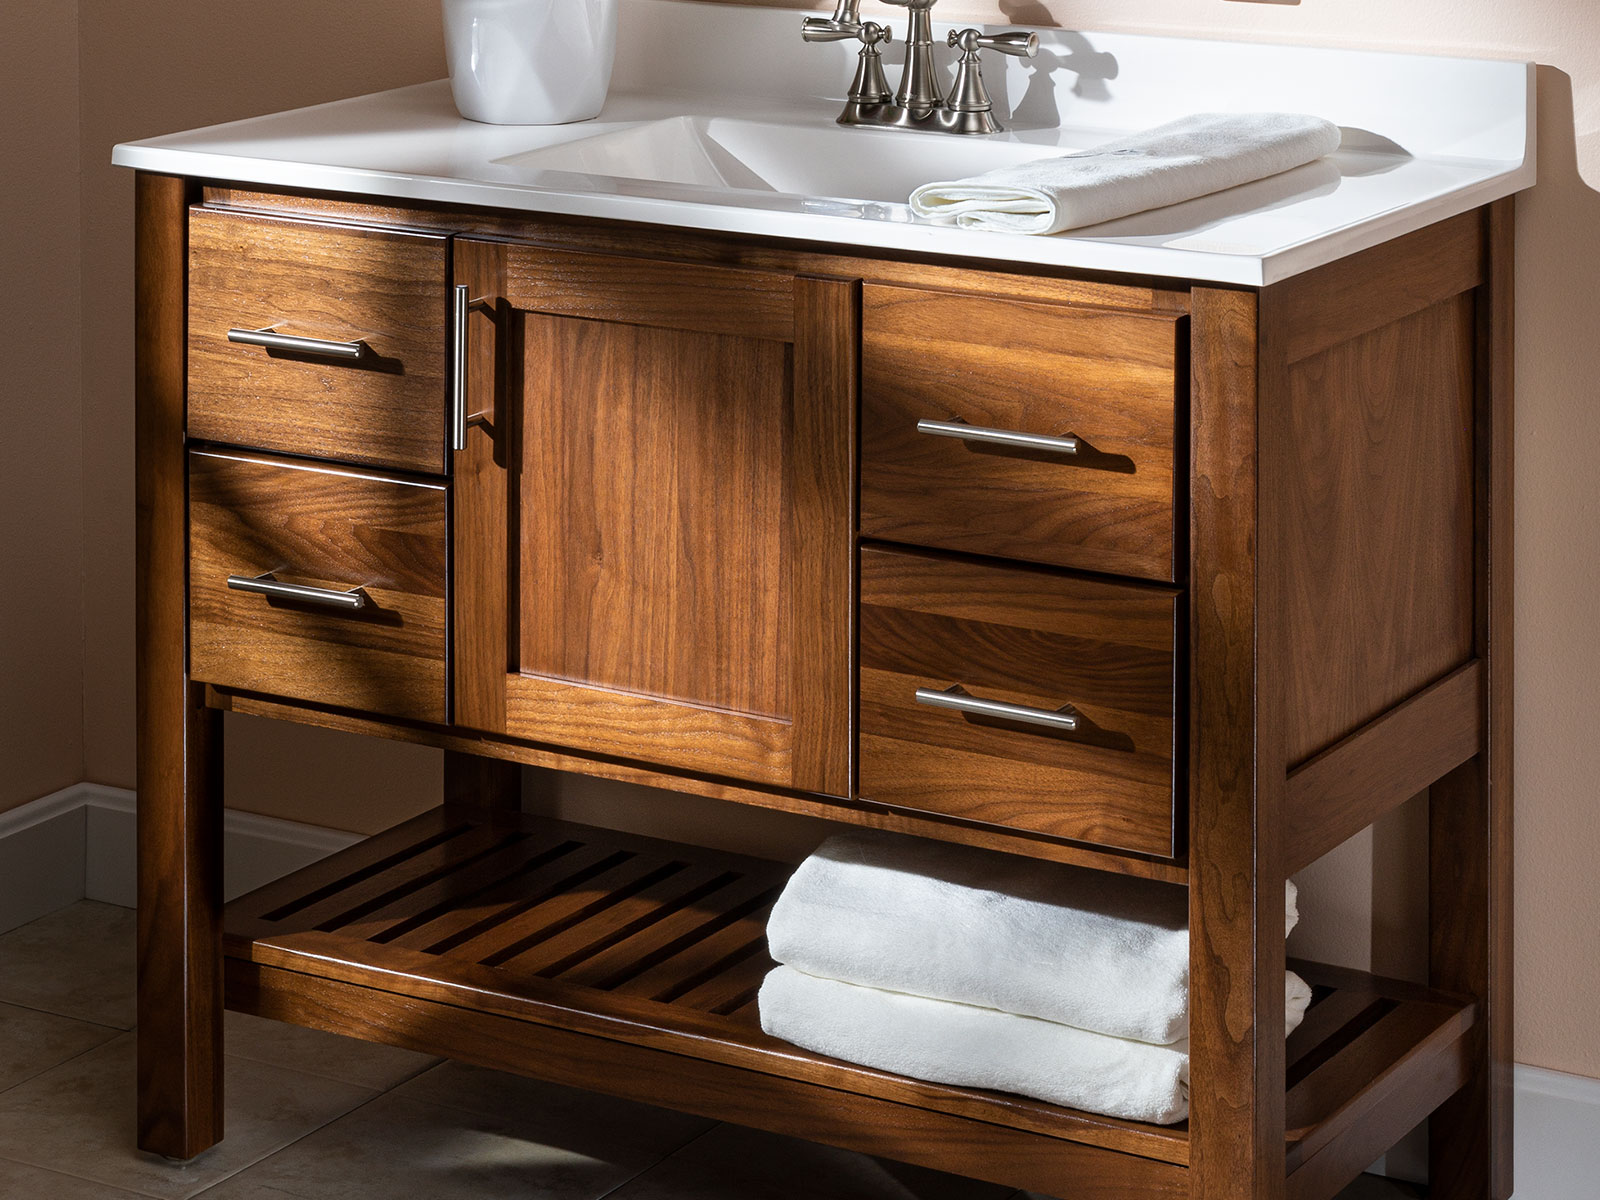 Bath Vanities And Cabinetry, 33 Inch Vanity Base Cabinet Only